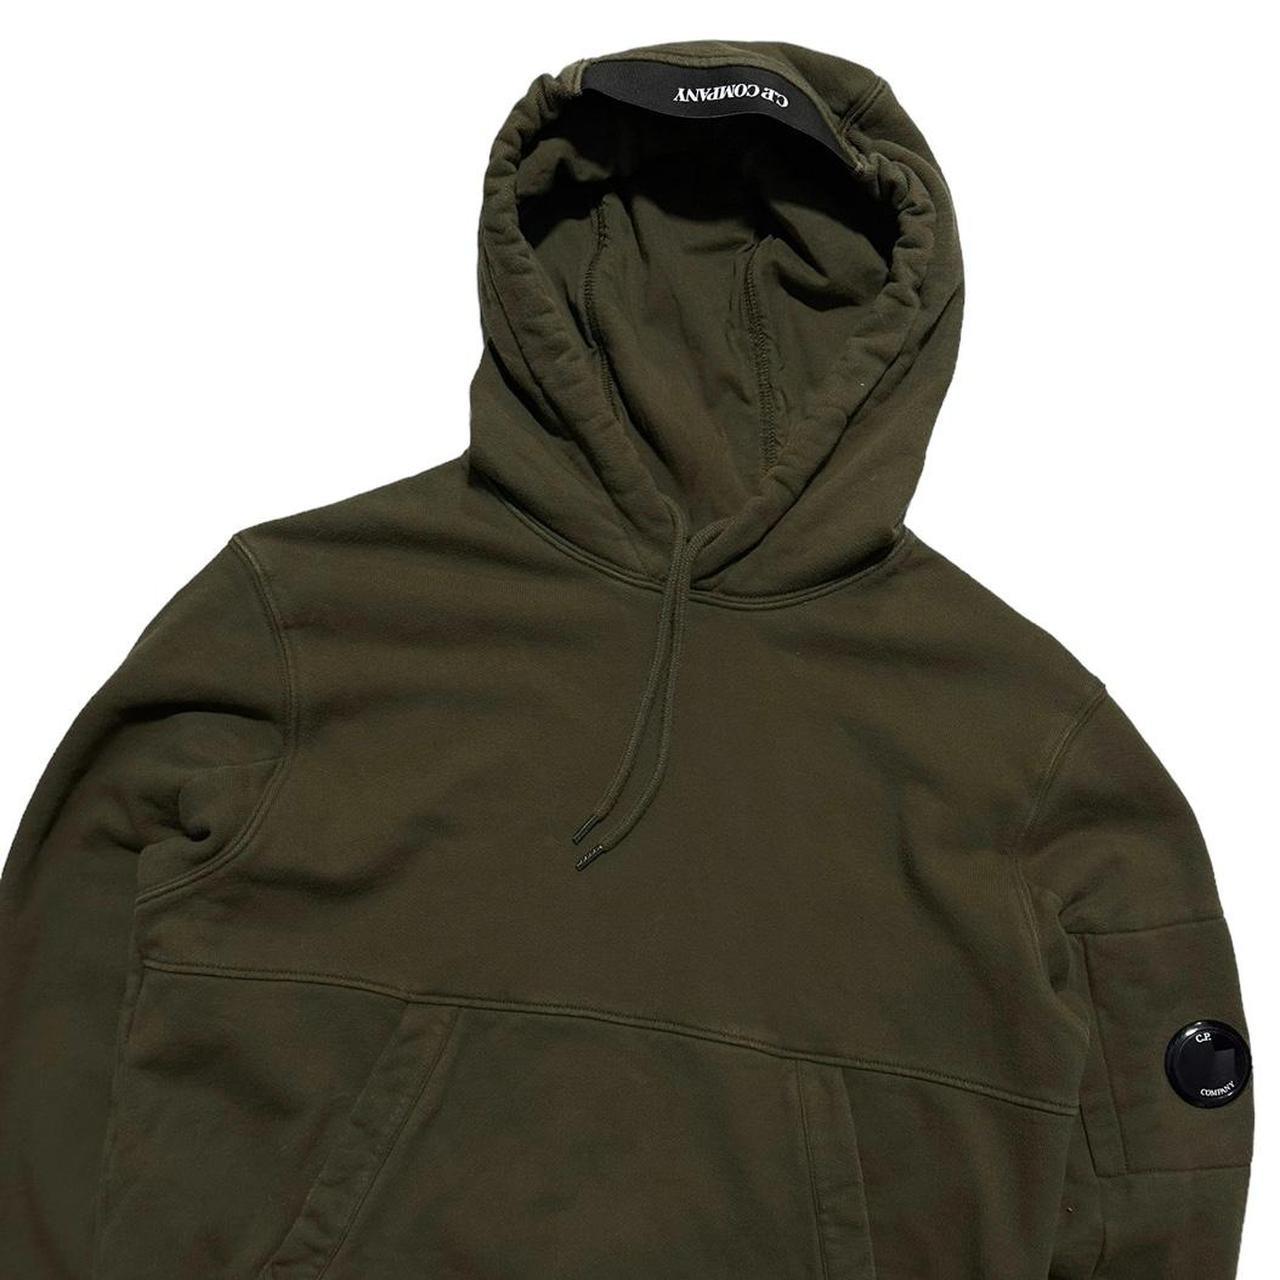 CP Company Khaki Pullover Hoodie - Known Source